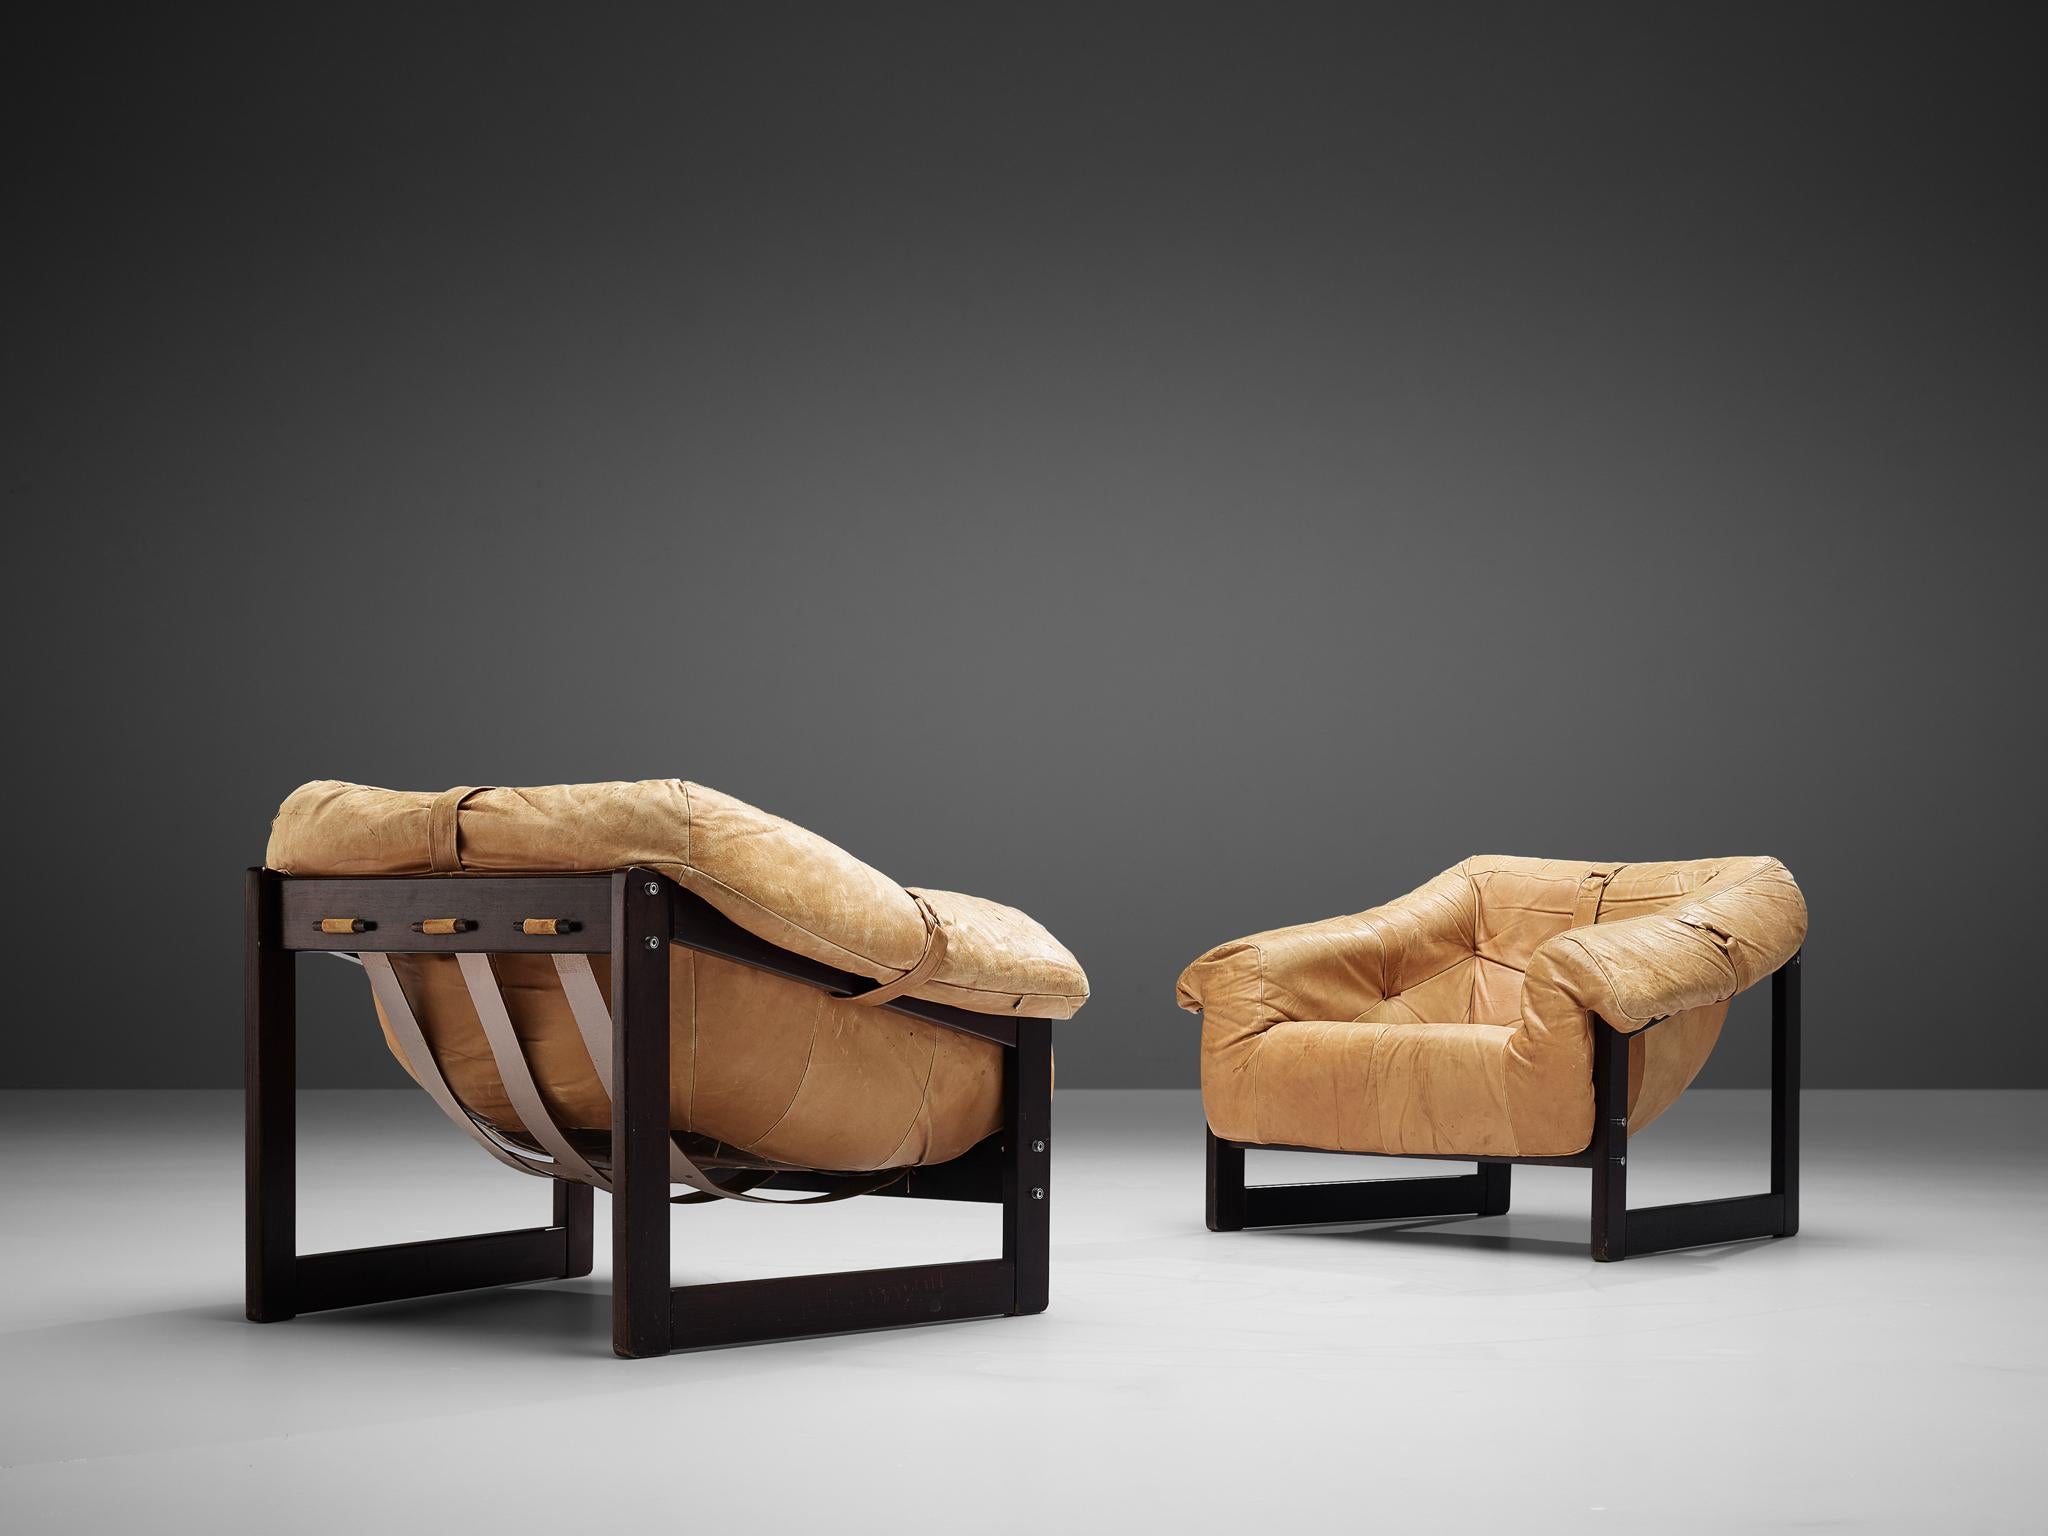 Percival Lafer for Moveis Patenteados, pair of lounge chairs model MP-091, cognac leather upholstery, Brazil, 1960s

A wonderful set of lounge chairs by Brazilian designer Percival Lafer. These chairs consists of two geometric shaped frames,